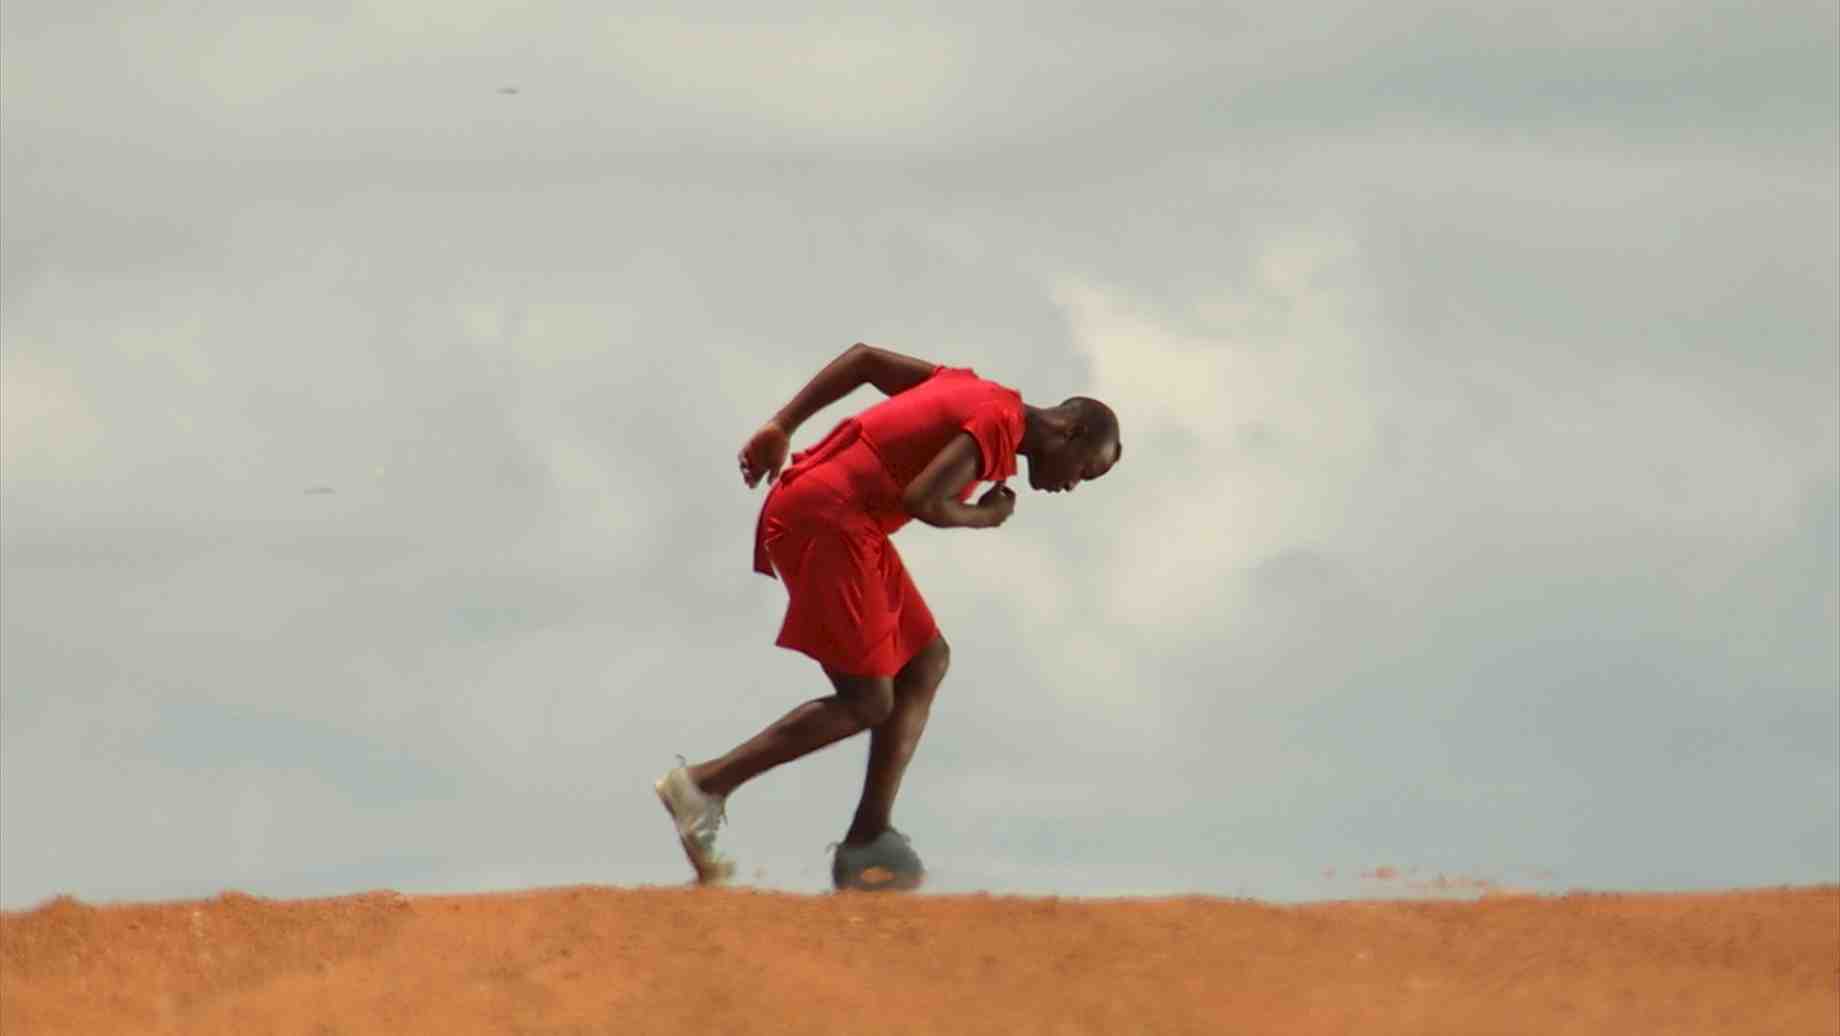 Nora Chipaumire returns to the red clay and vast sky of her Zimbabwean youth: the opening shot of NORA.